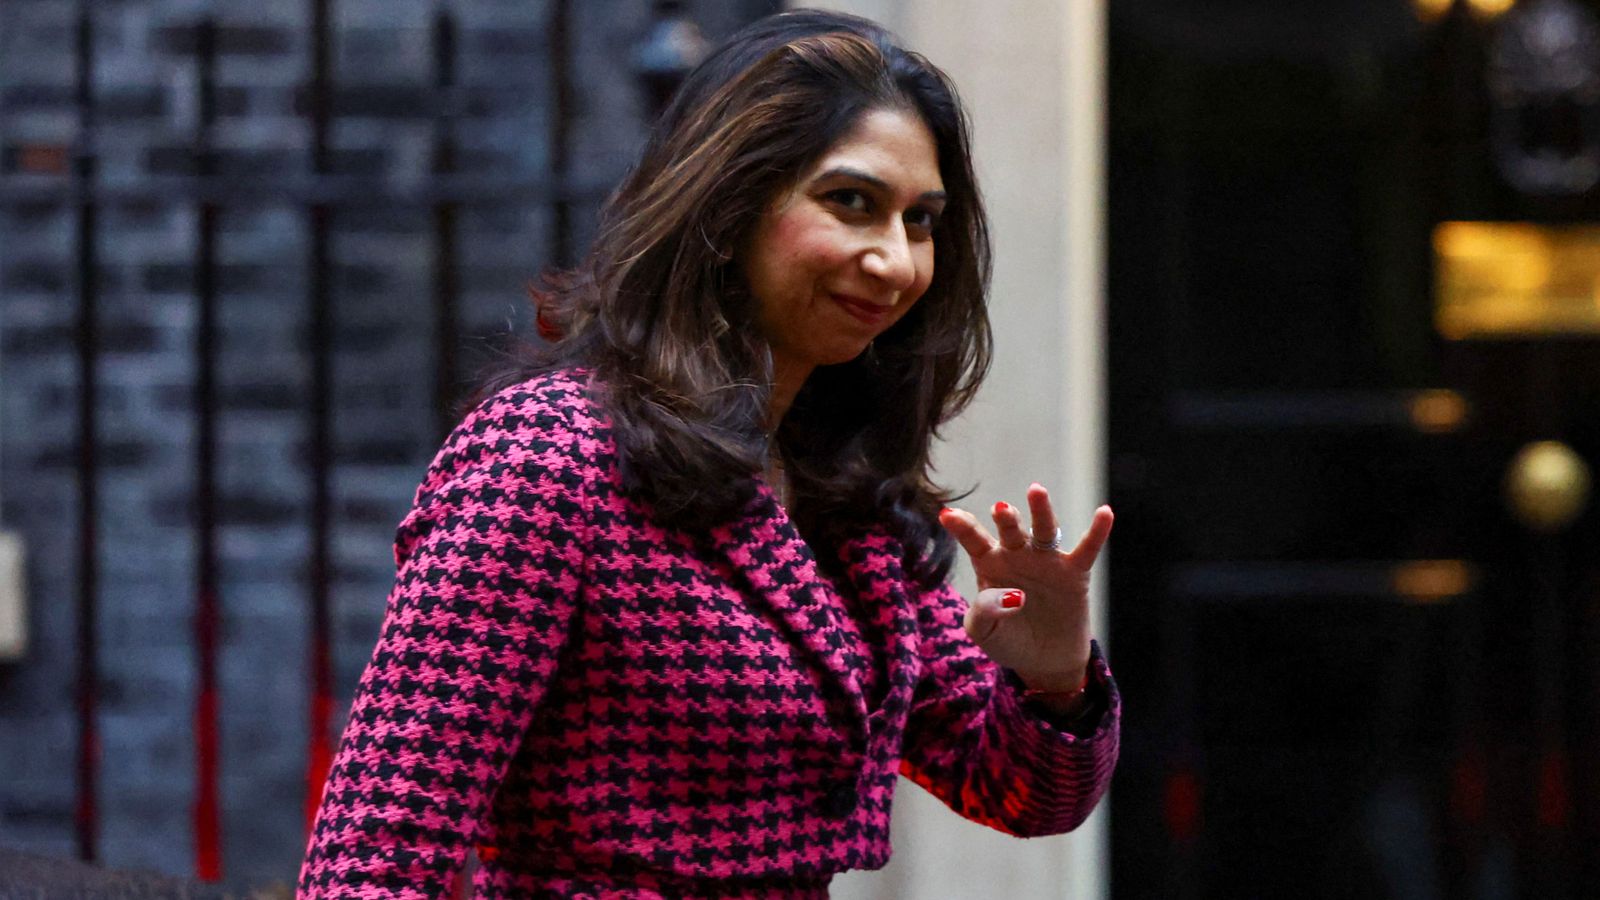 Suella Braverman's inflammatory language will raise temperature in parliament - but plays to Tory gallery